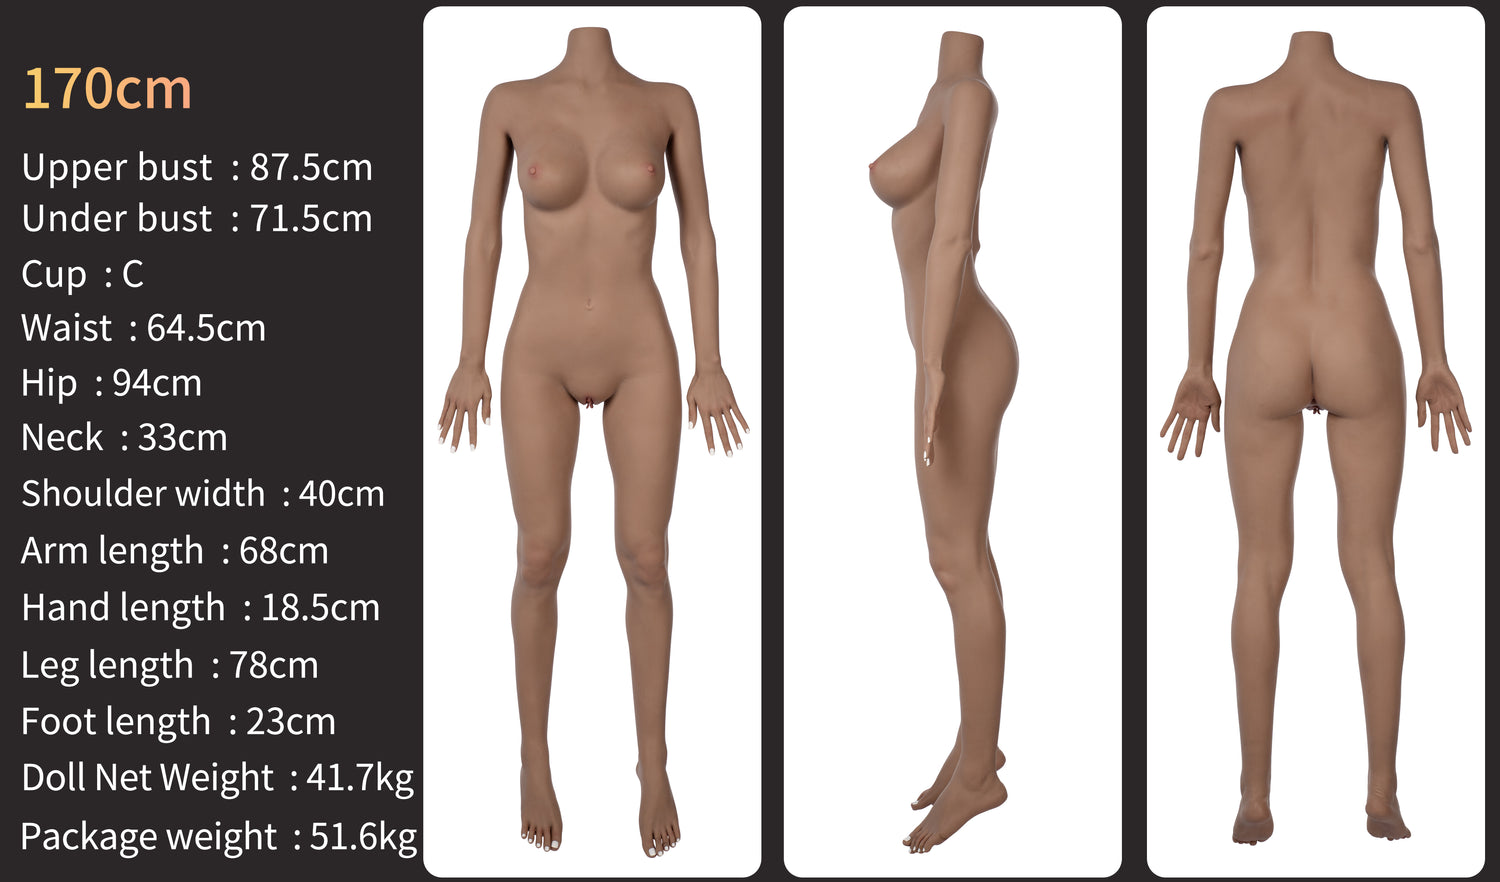 Zelex Doll Inspiration 170 cm C Fusion - Yvonne (Movable Jaw) | Buy Sex Dolls at DOLLS ACTUALLY